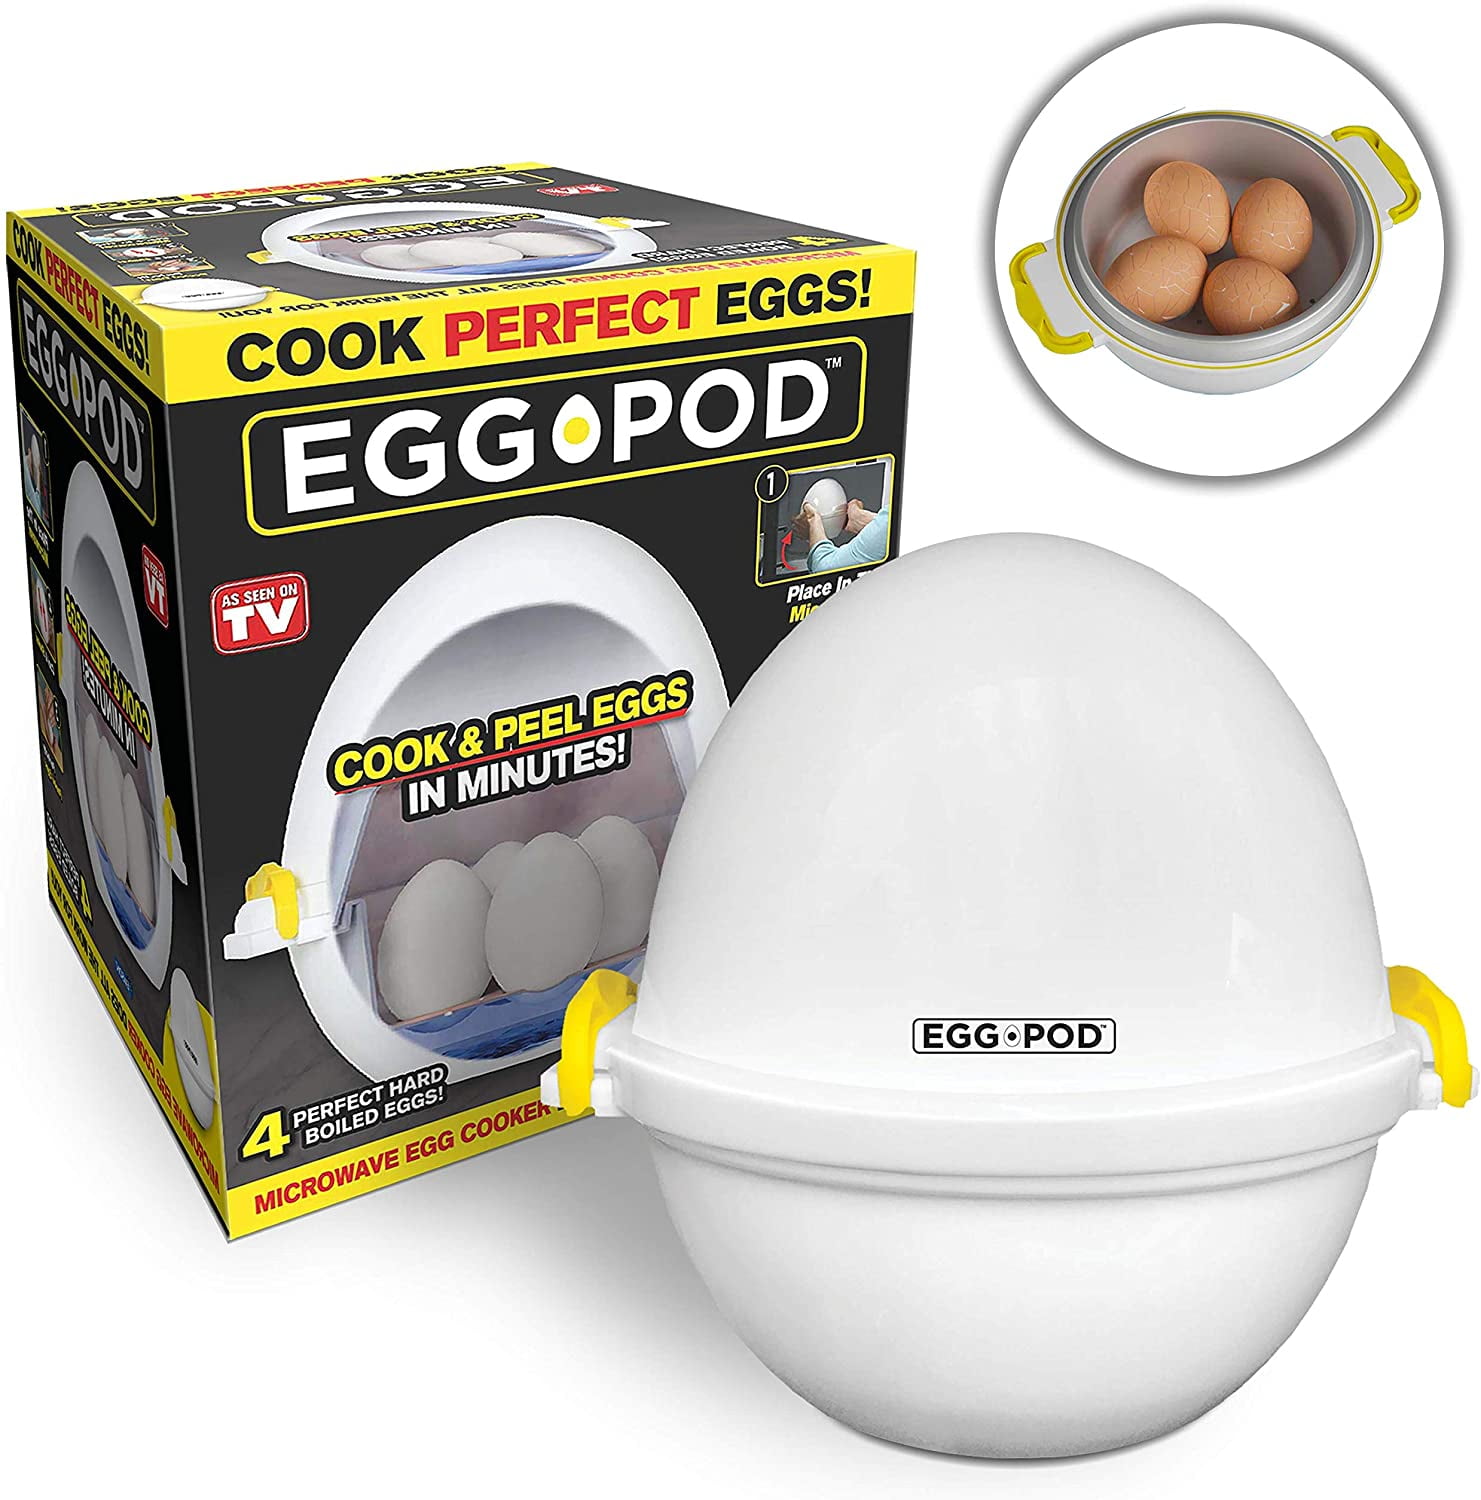 Eggpod 7076 By Emson Wireless Microwave Egg Maker Cooker Boiler Steamer 4 Perfectly Cooked Hard Boiled Eggs In Under 9 Minutes As Seen On Tv 1 Count Walmart Com Walmart Com